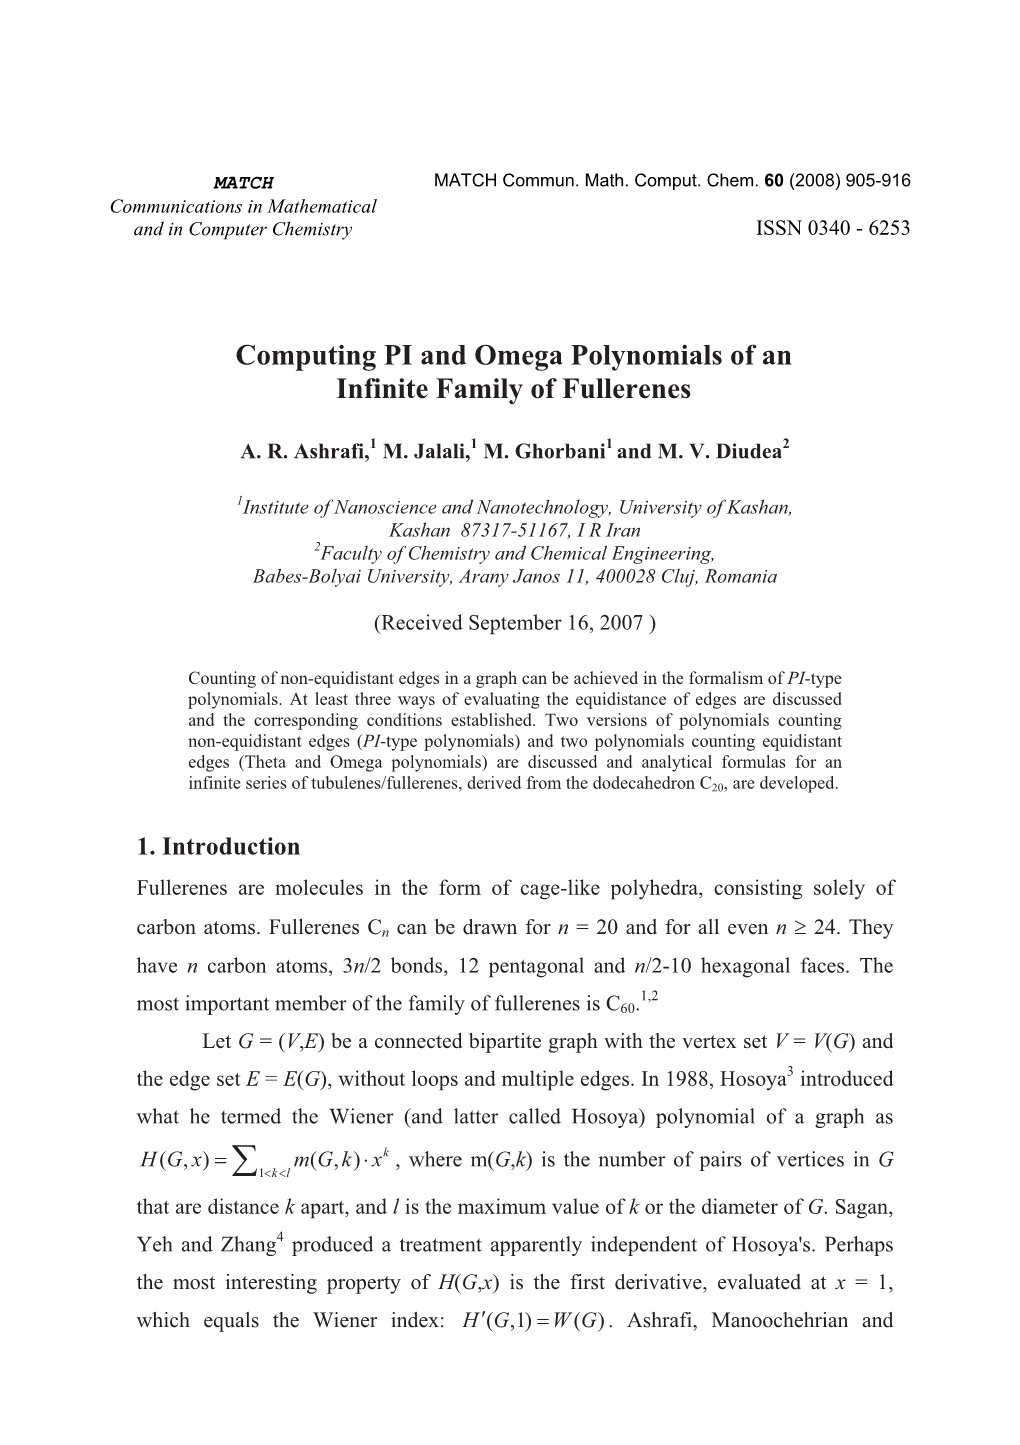 Computing PI and Omega Polynomials of an Infinite Family of Fullerenes